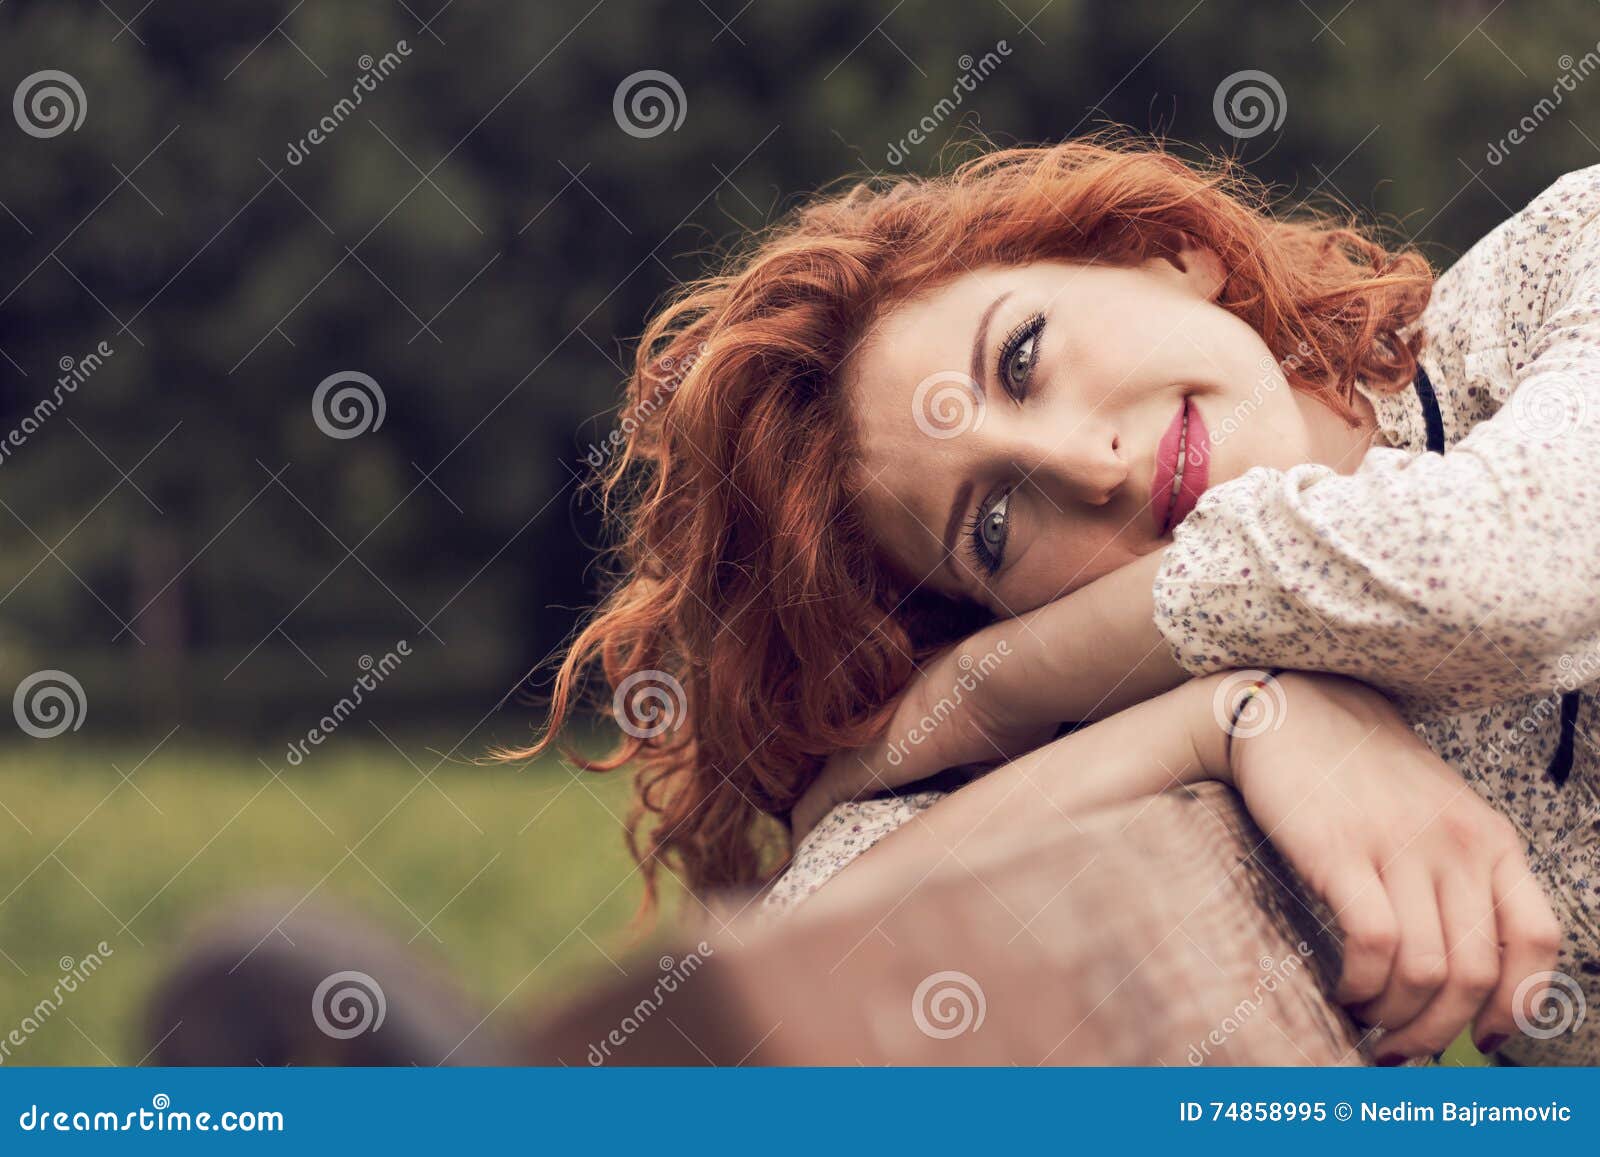 Redhead Girl In Park Stock Image Image Of Lifestyle 74858995 